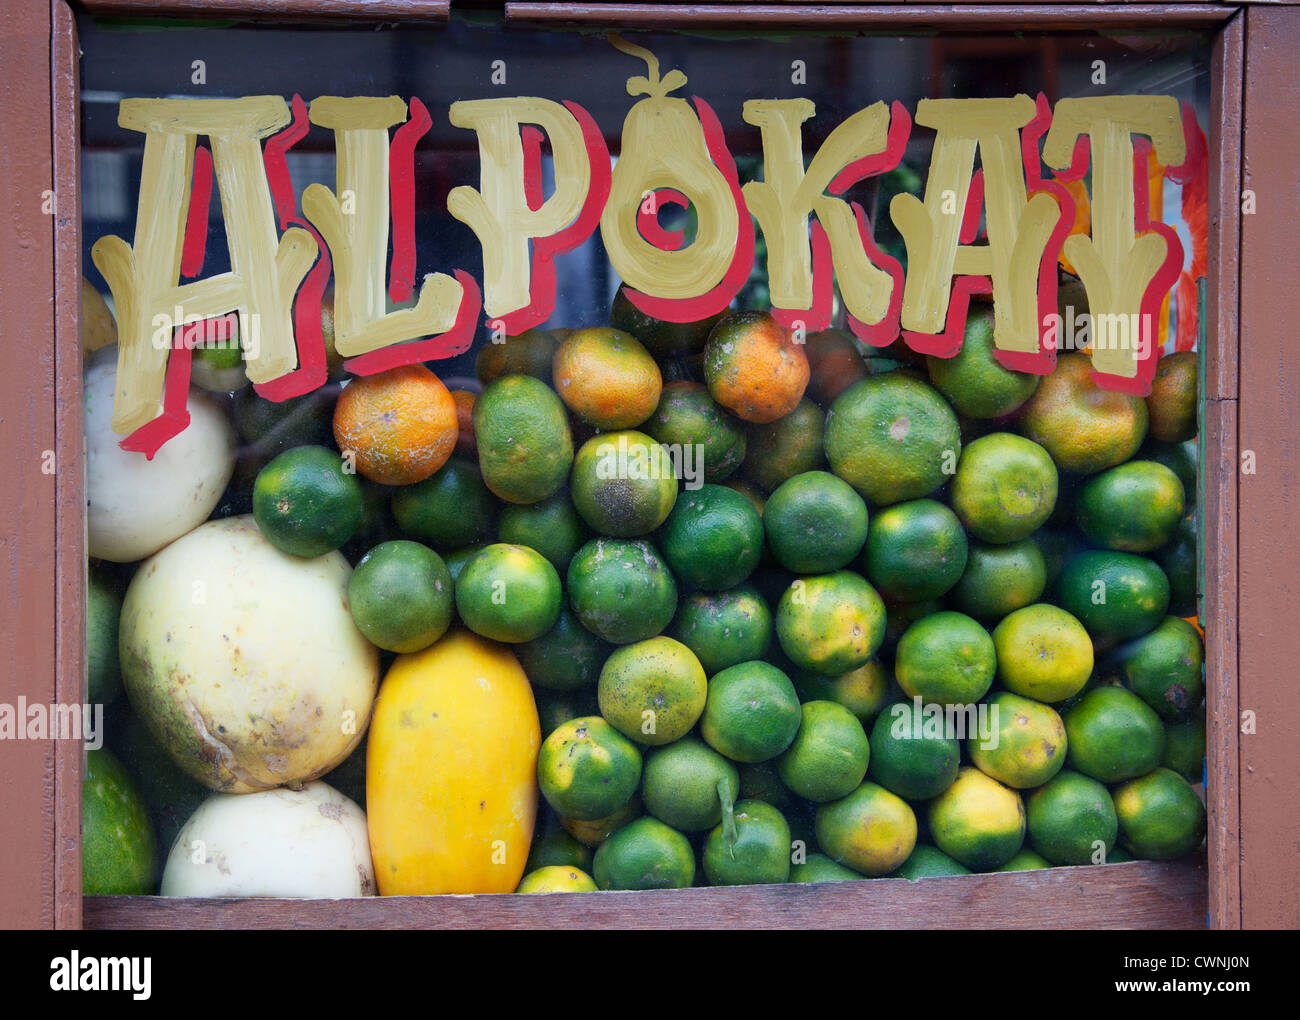 Fruits stall Stock Photo